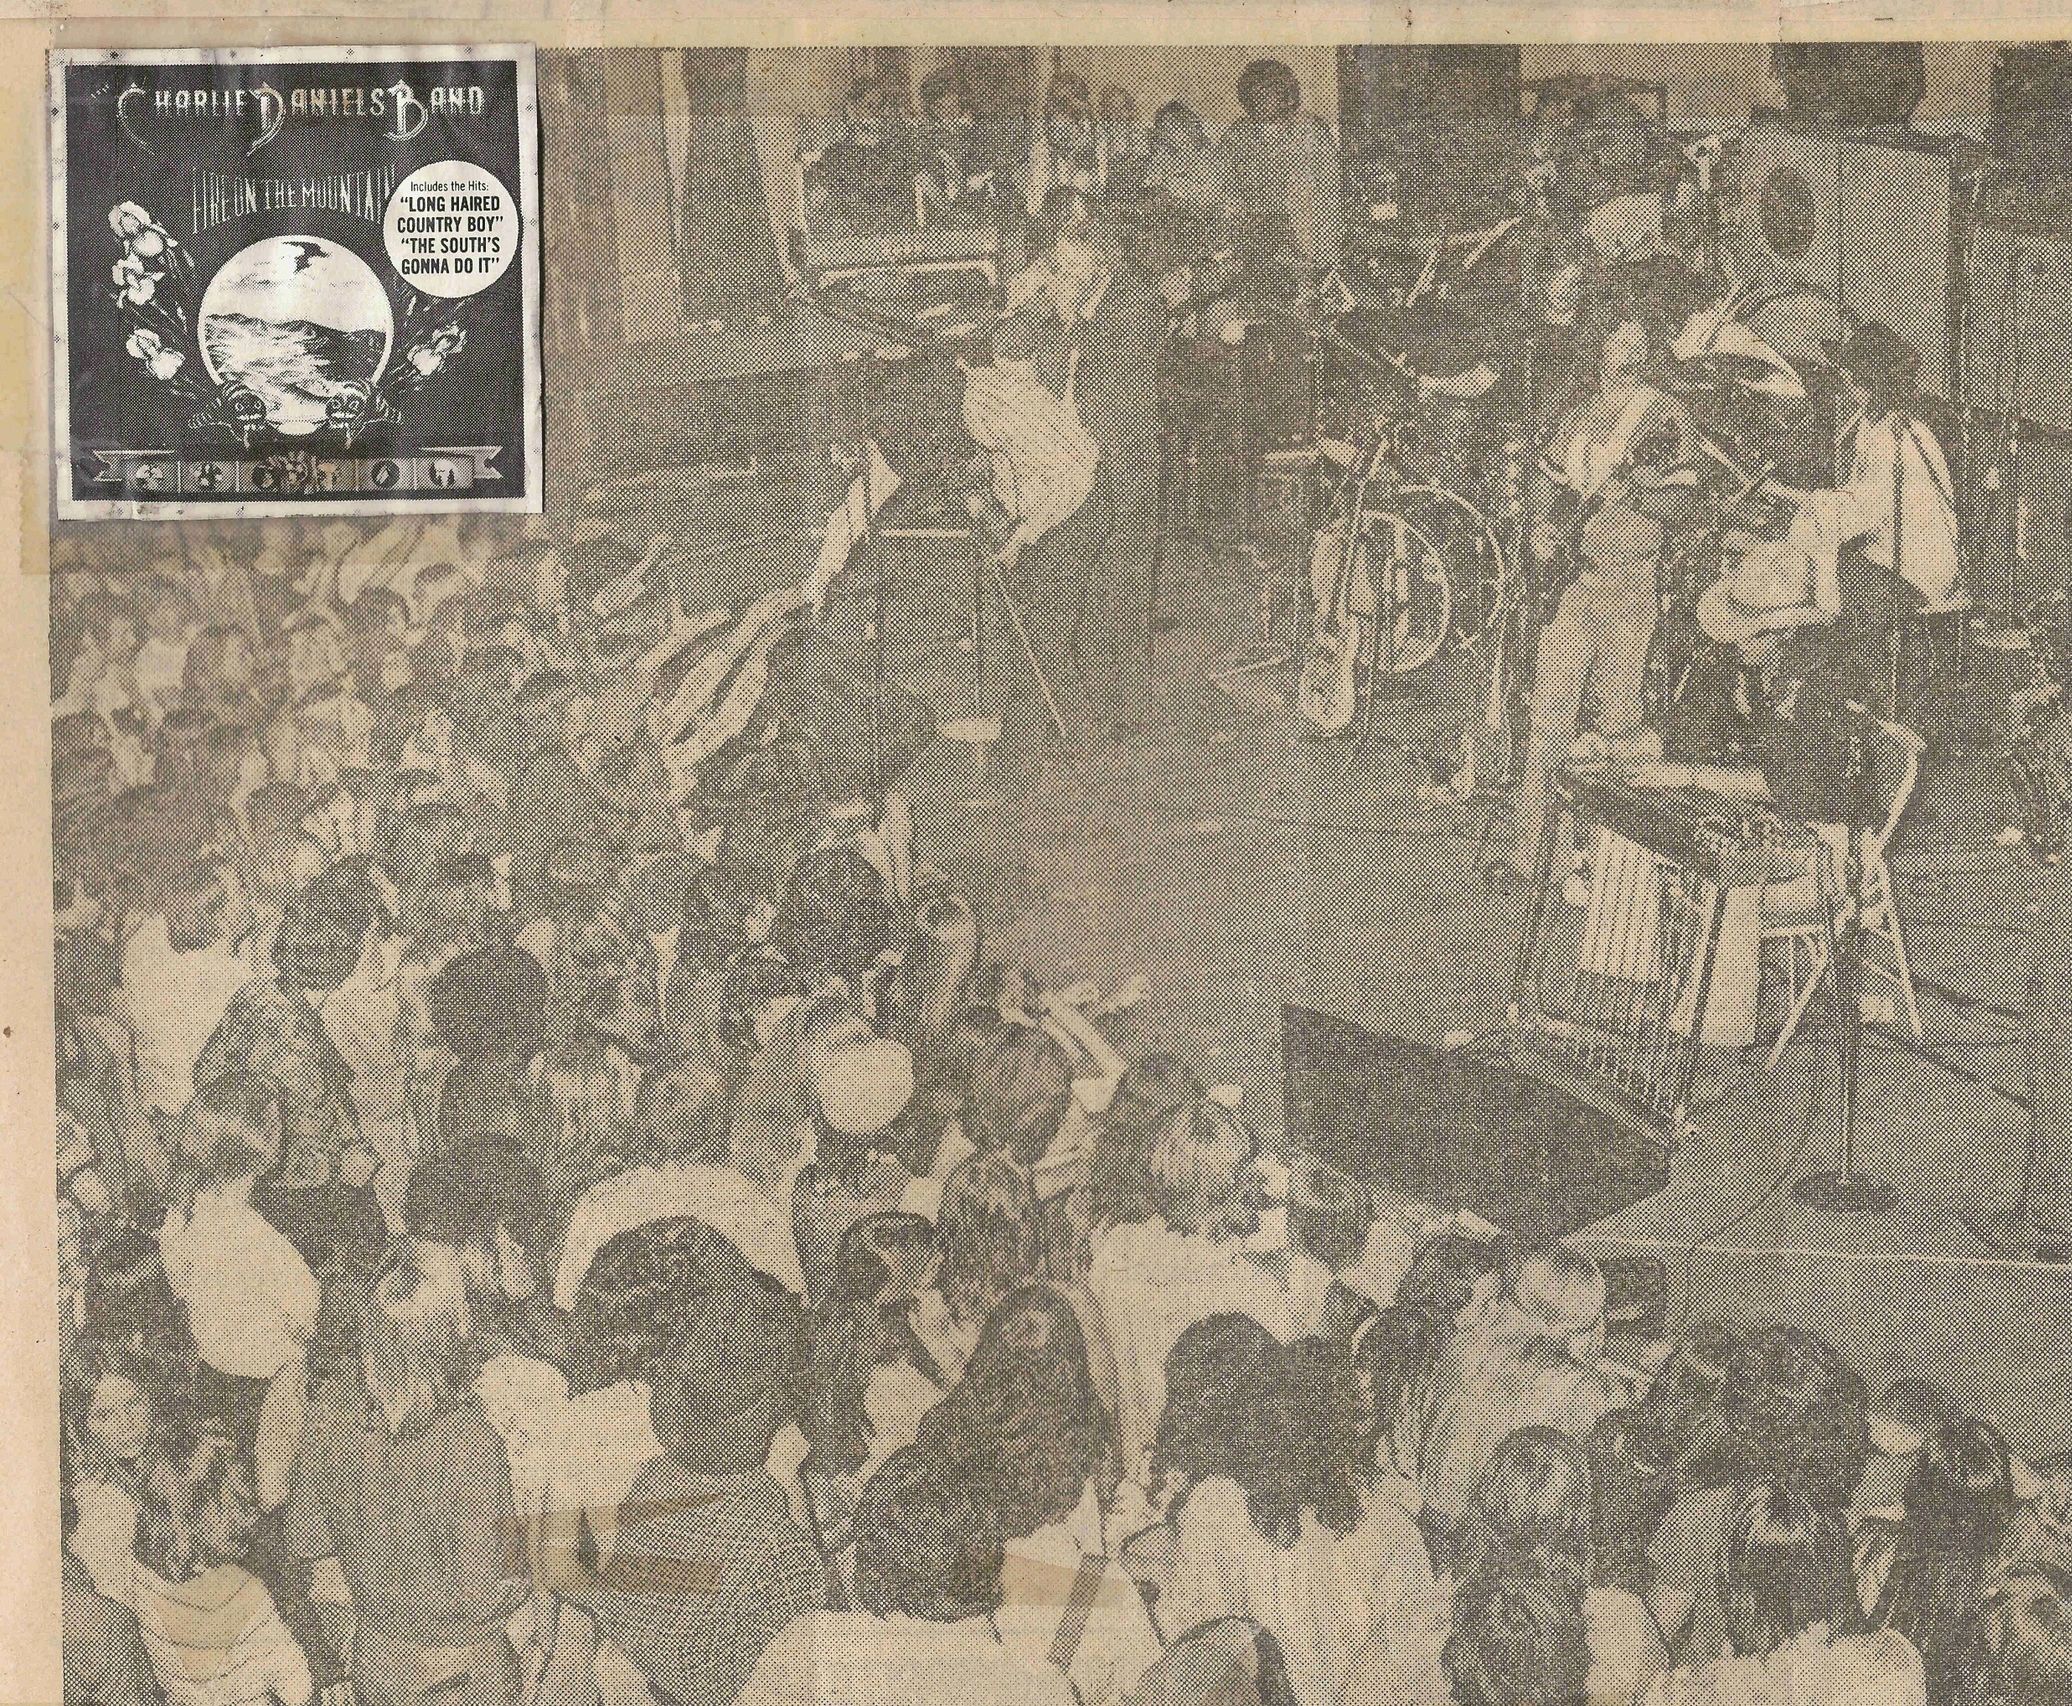 This is a newspaper picture from the first Volunteer Jam at Nashville's War Memorial Auditorium 1974